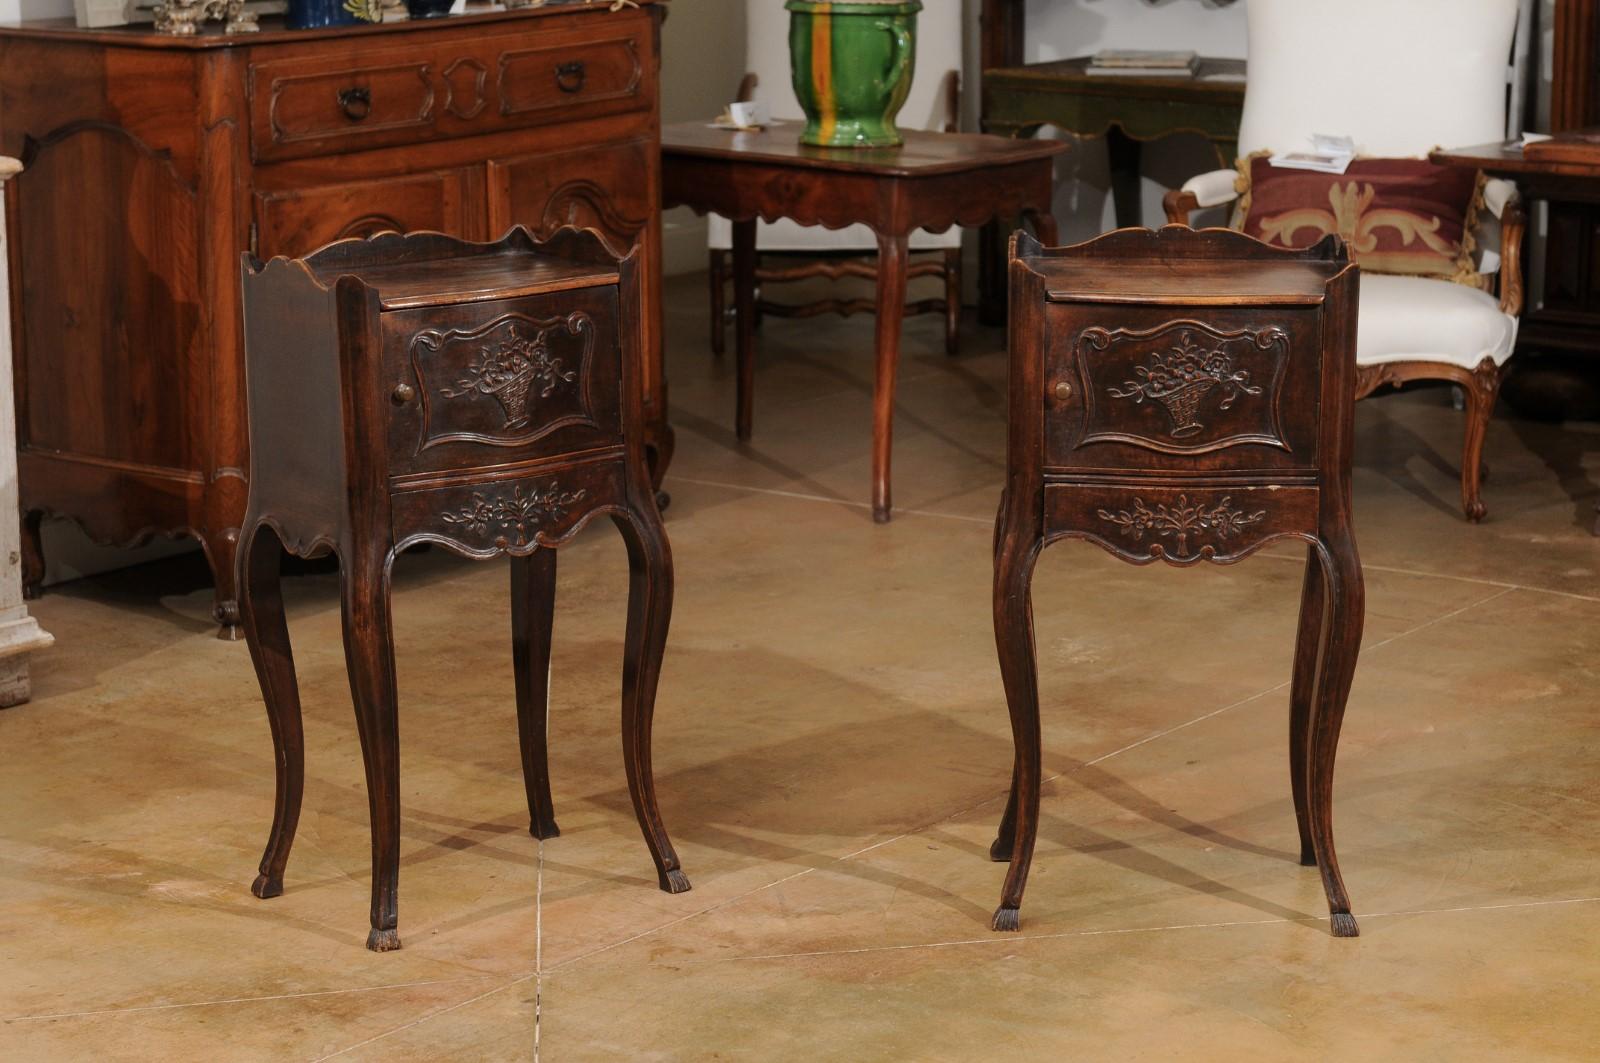 A pair of French walnut tables de chevet from the 19th century, with carved foliage and cabriole legs. Created in France during the 19th century, each of this pair of bedside tables features a rectangular top surrounded by a curving three-quarter